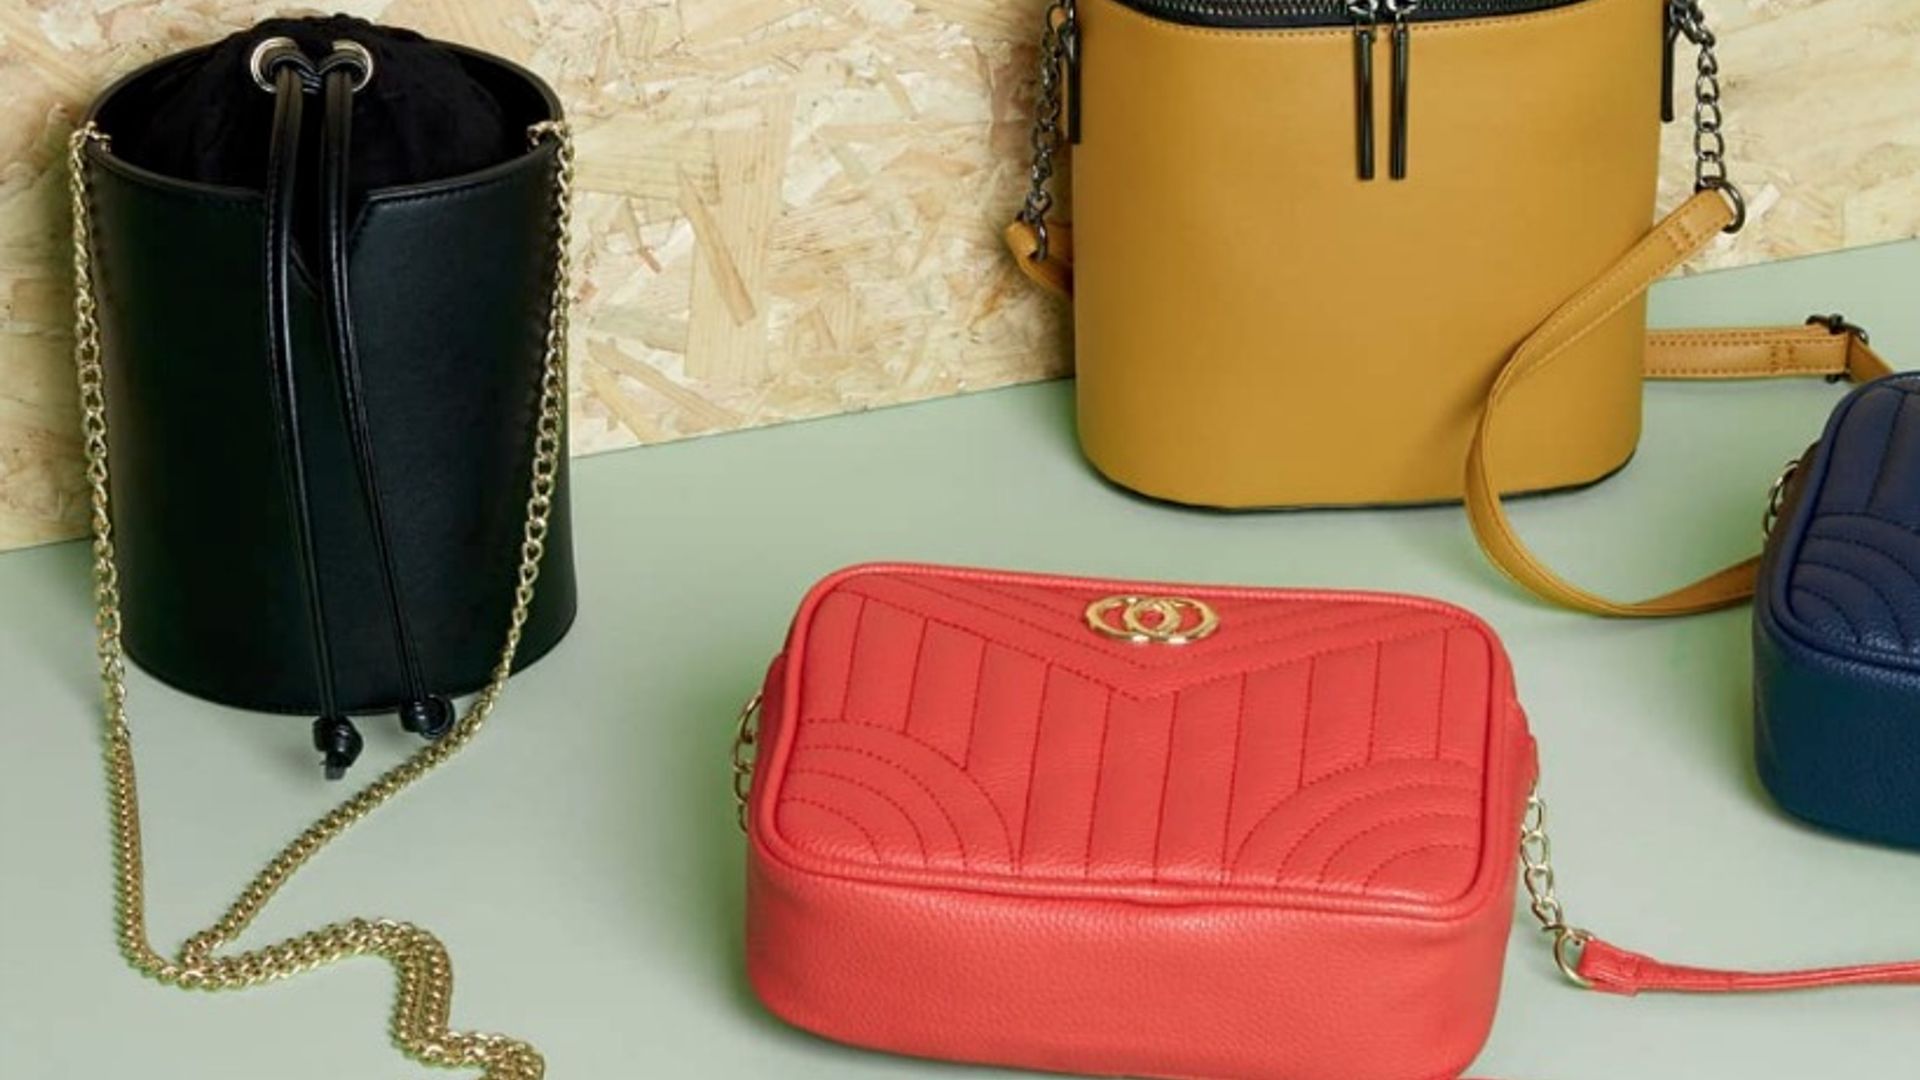 Primark is selling an incredible dupe of the Gucci Marmont bag | HELLO!